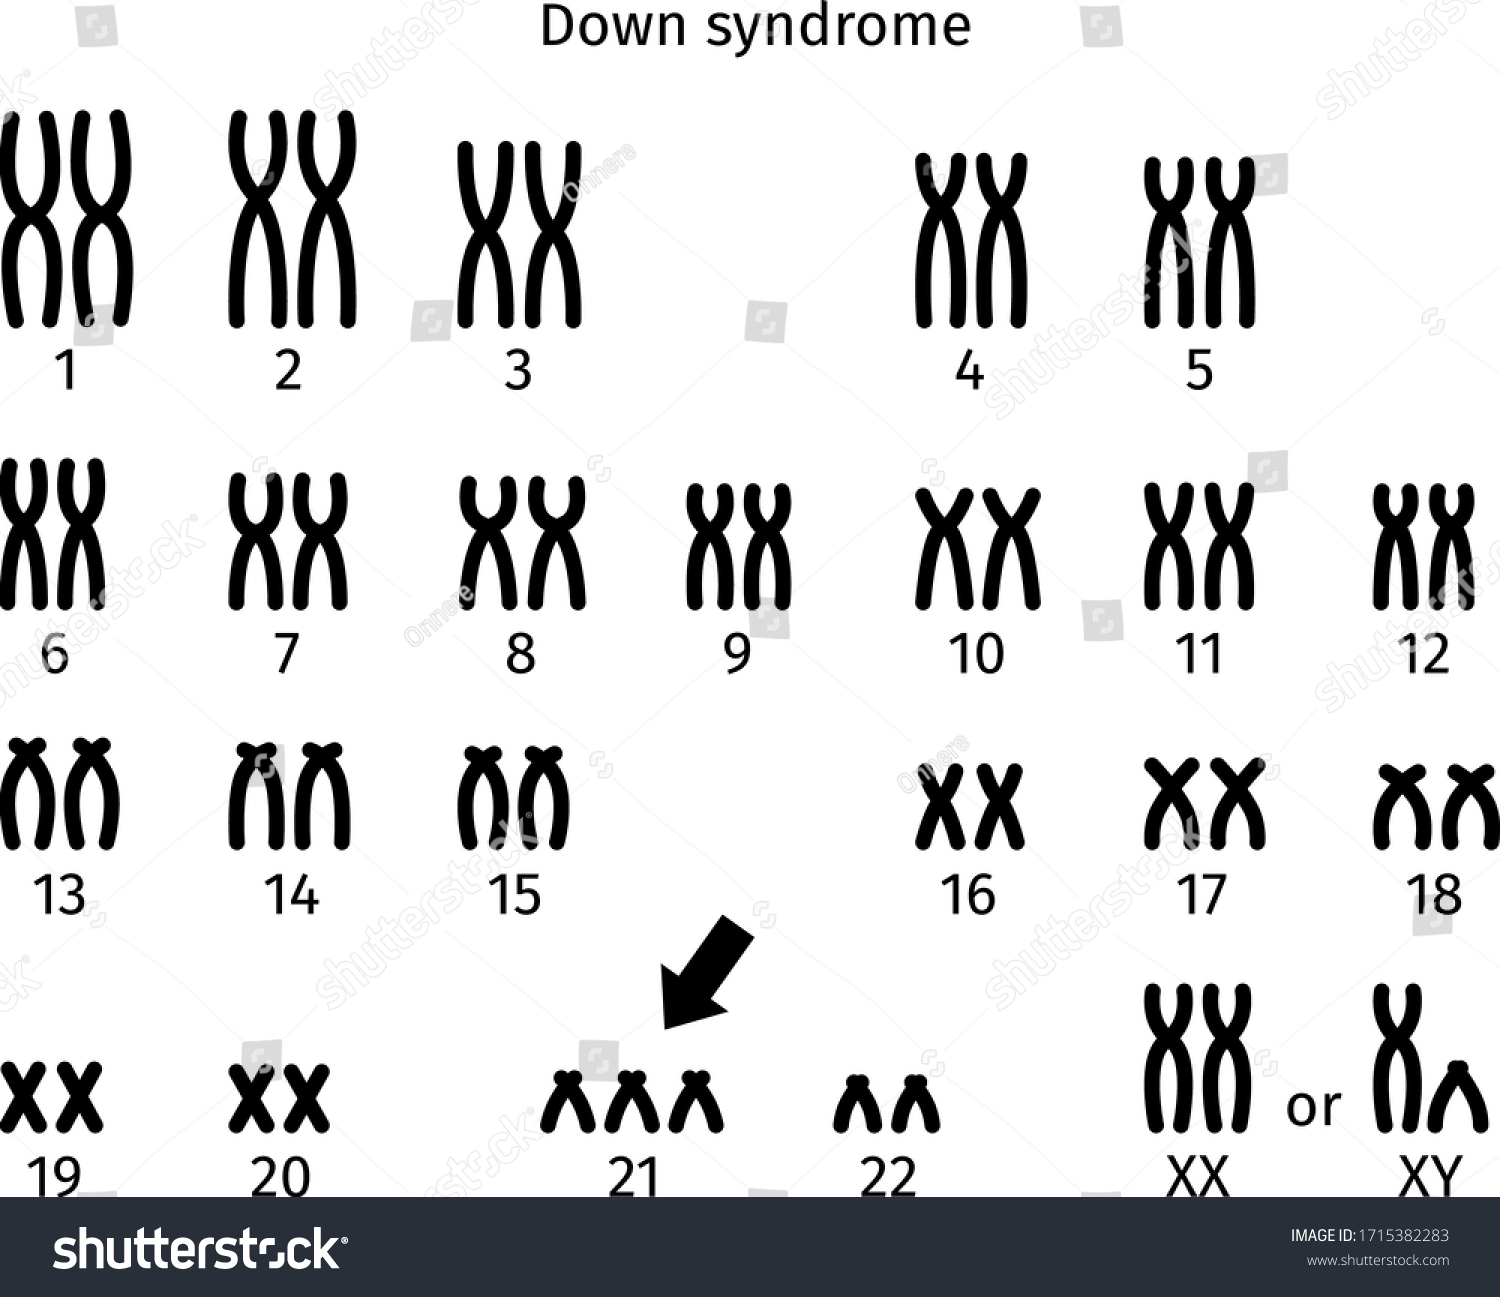 Scheme Of Down Syndrome Karyotype Of Human Royalty Free Stock Vector 1715382283 8827